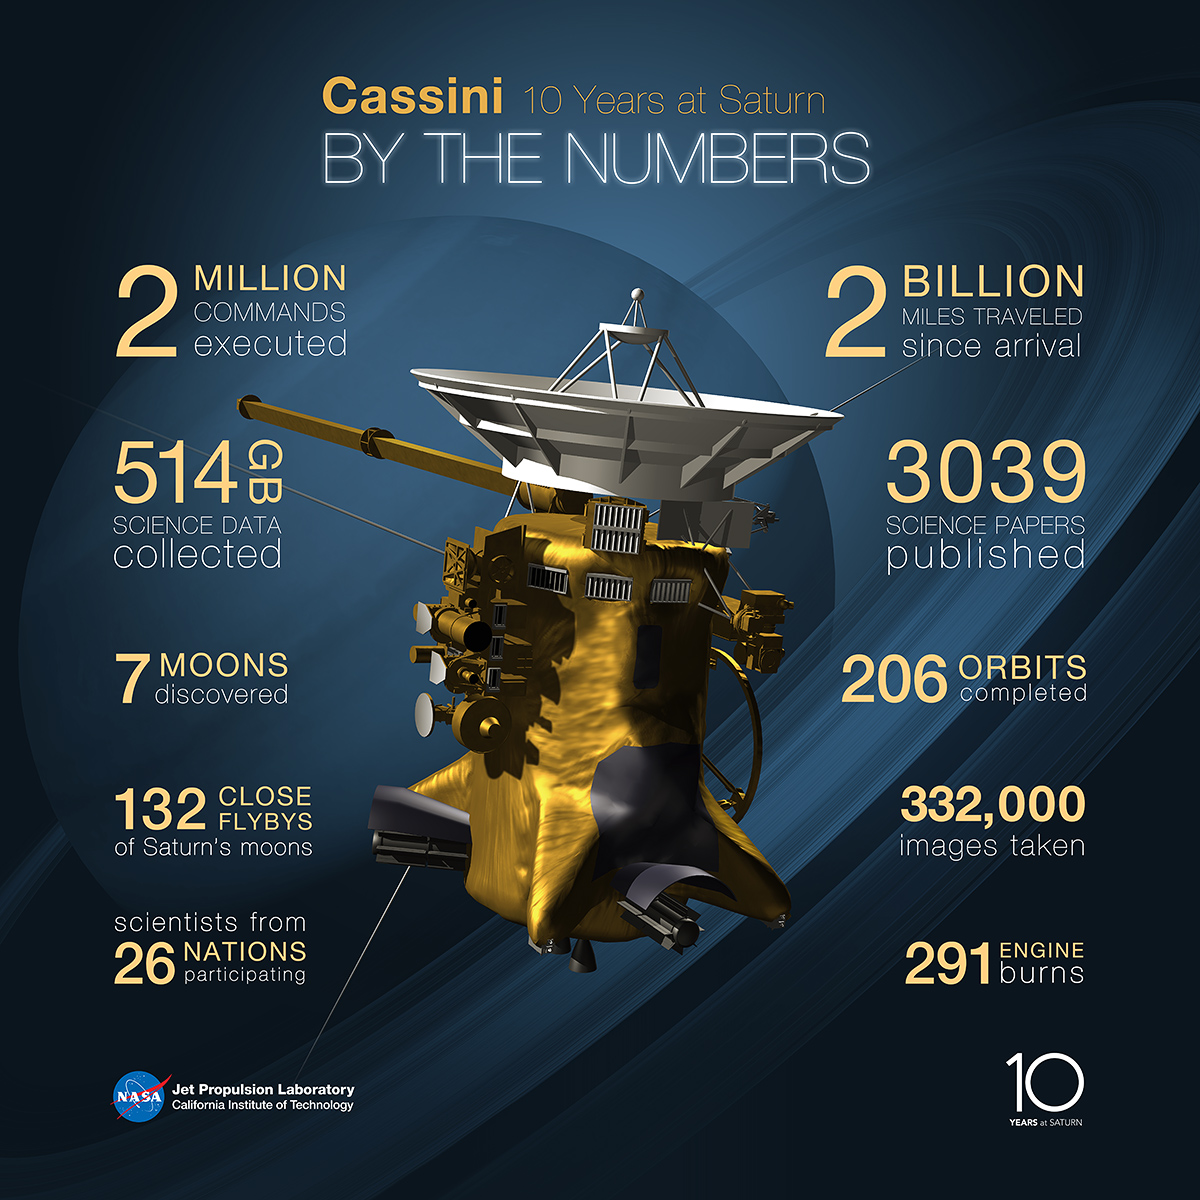 cassini_by_the_numbers.jpg